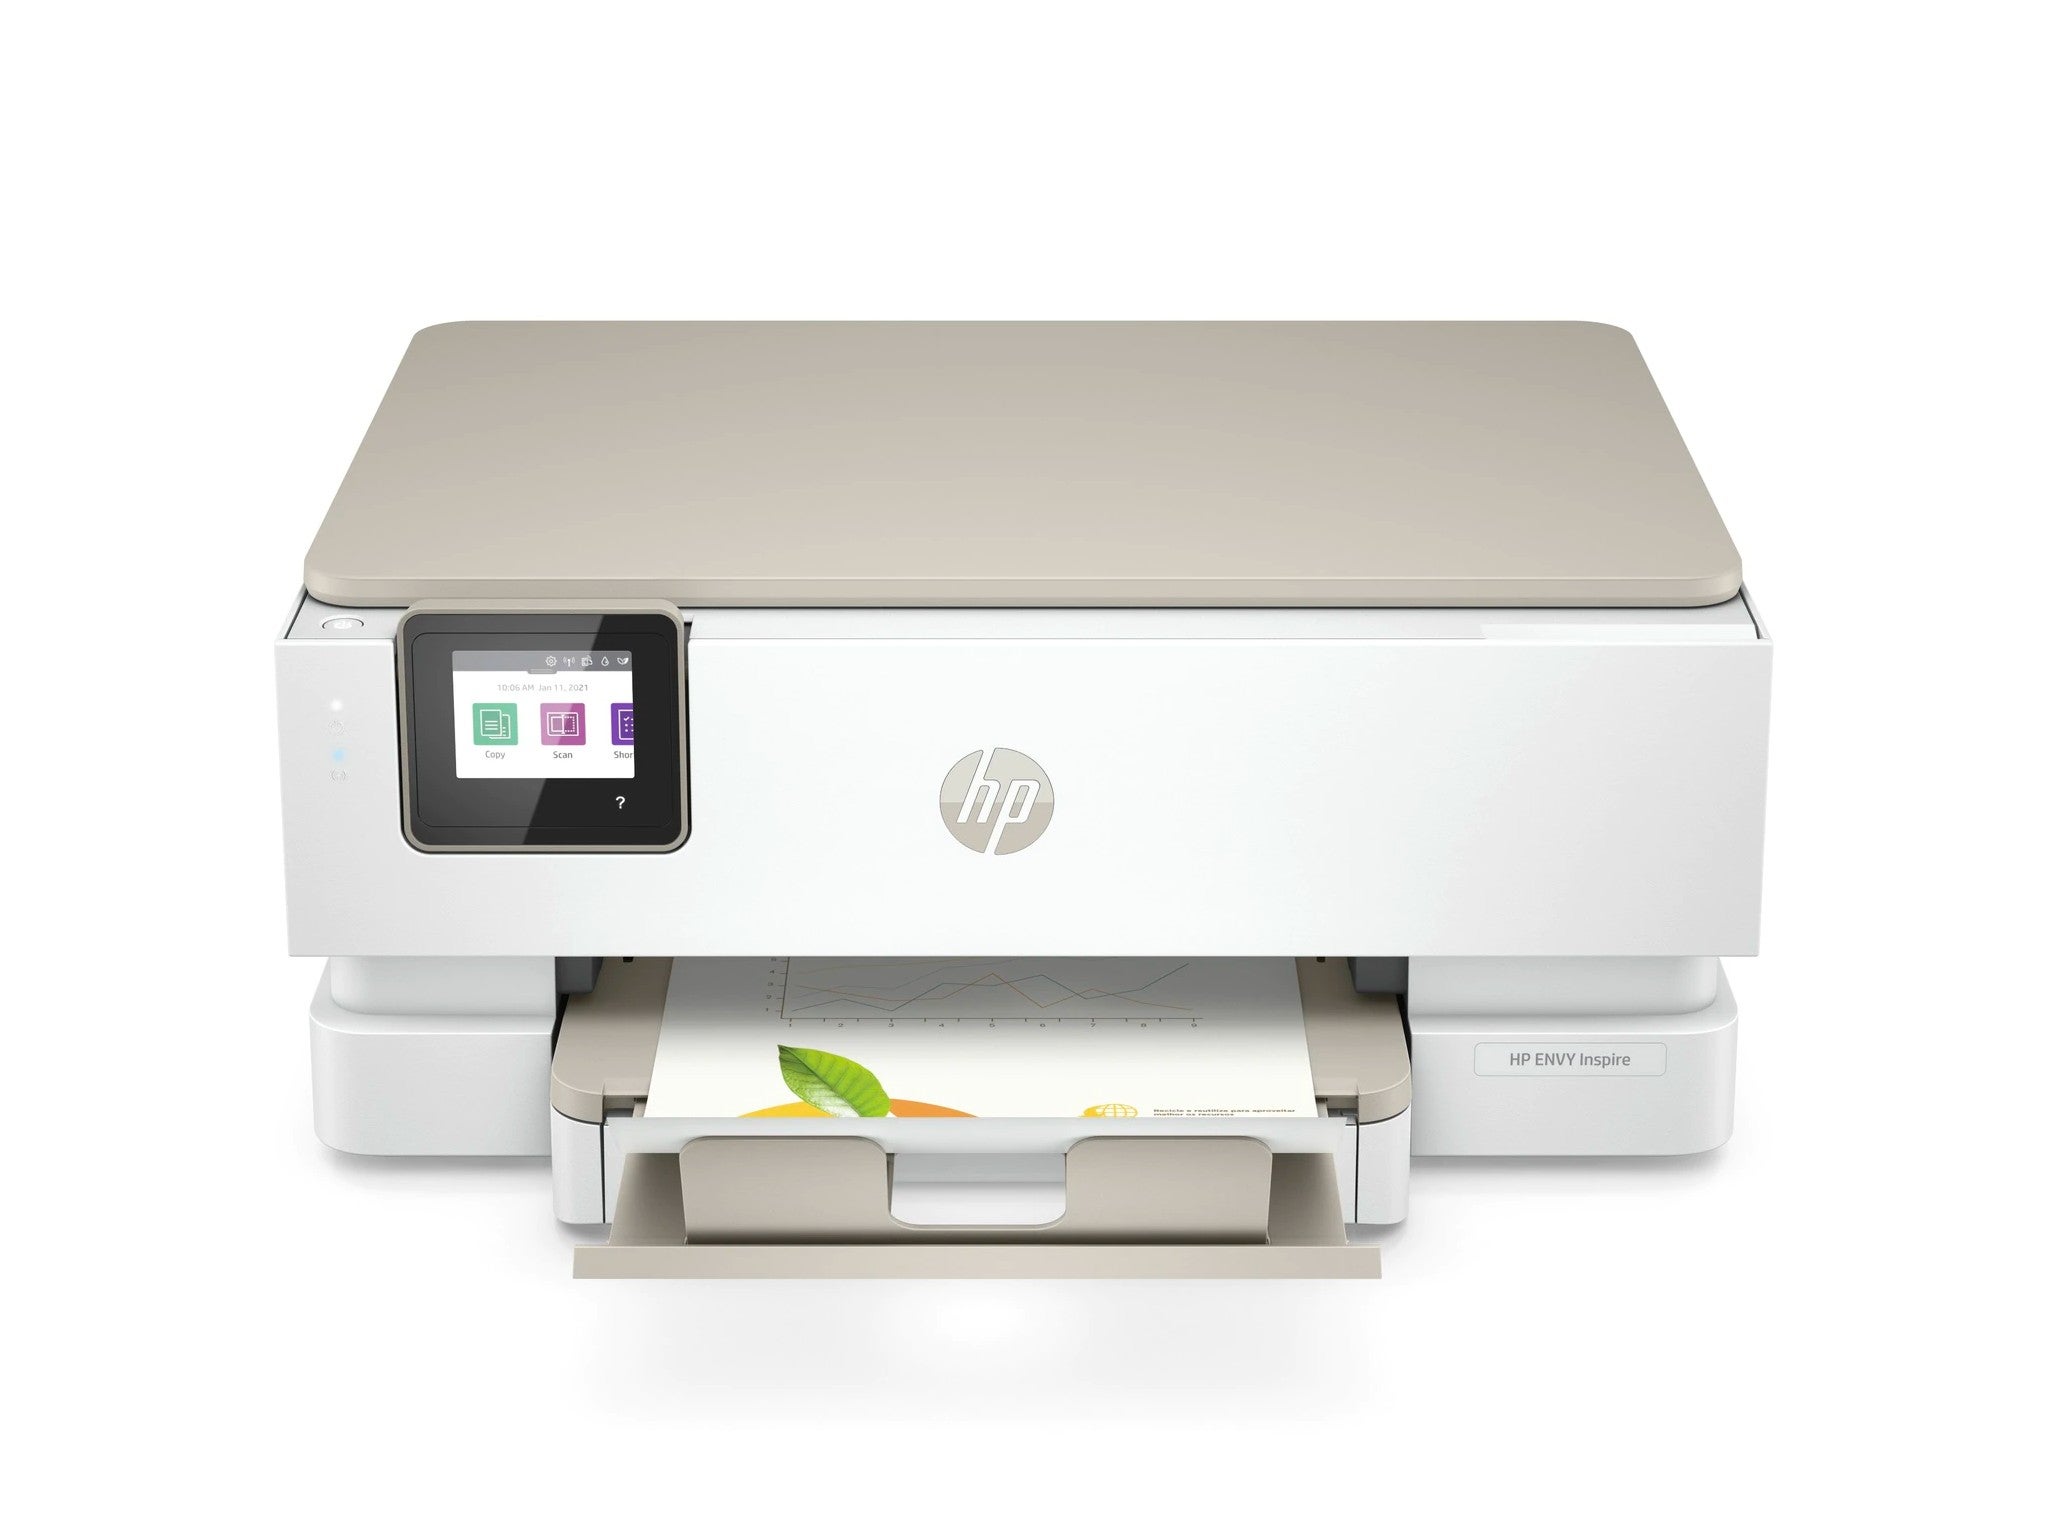 HP envy inspire 7220e indybest